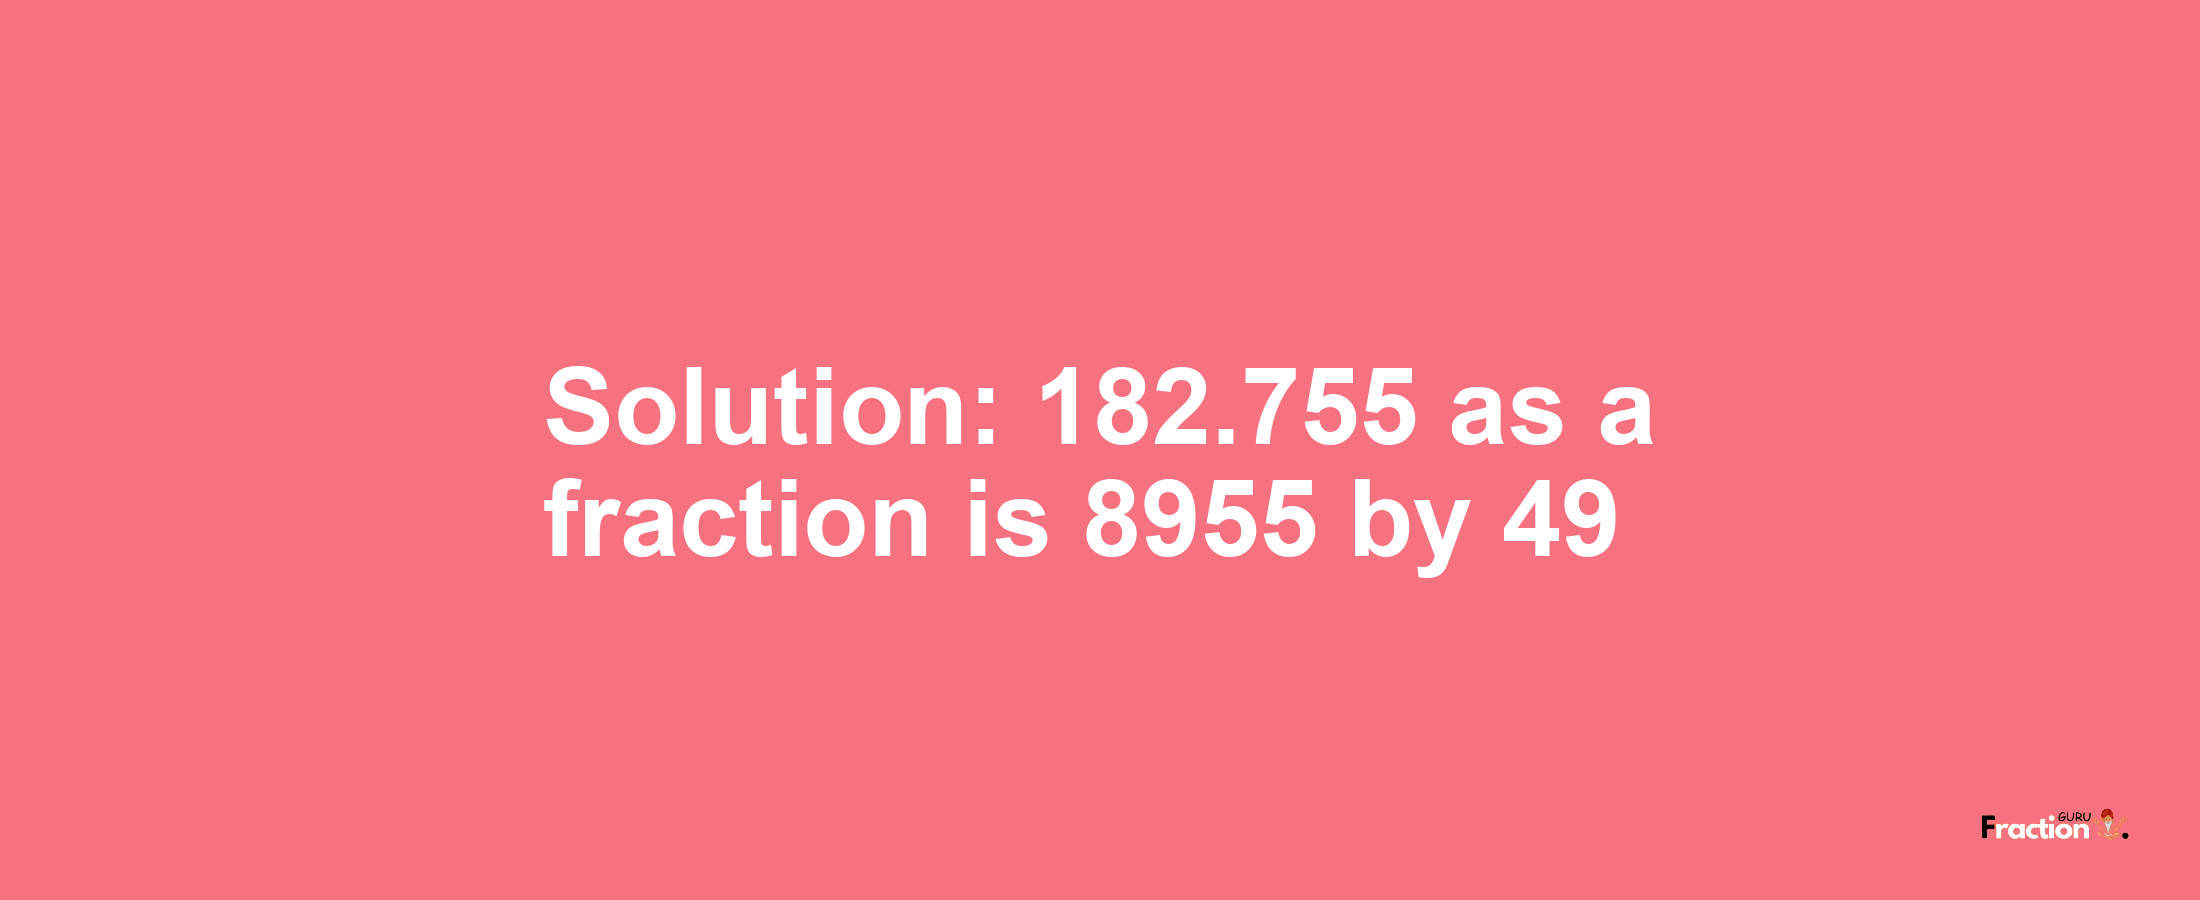 Solution:182.755 as a fraction is 8955/49